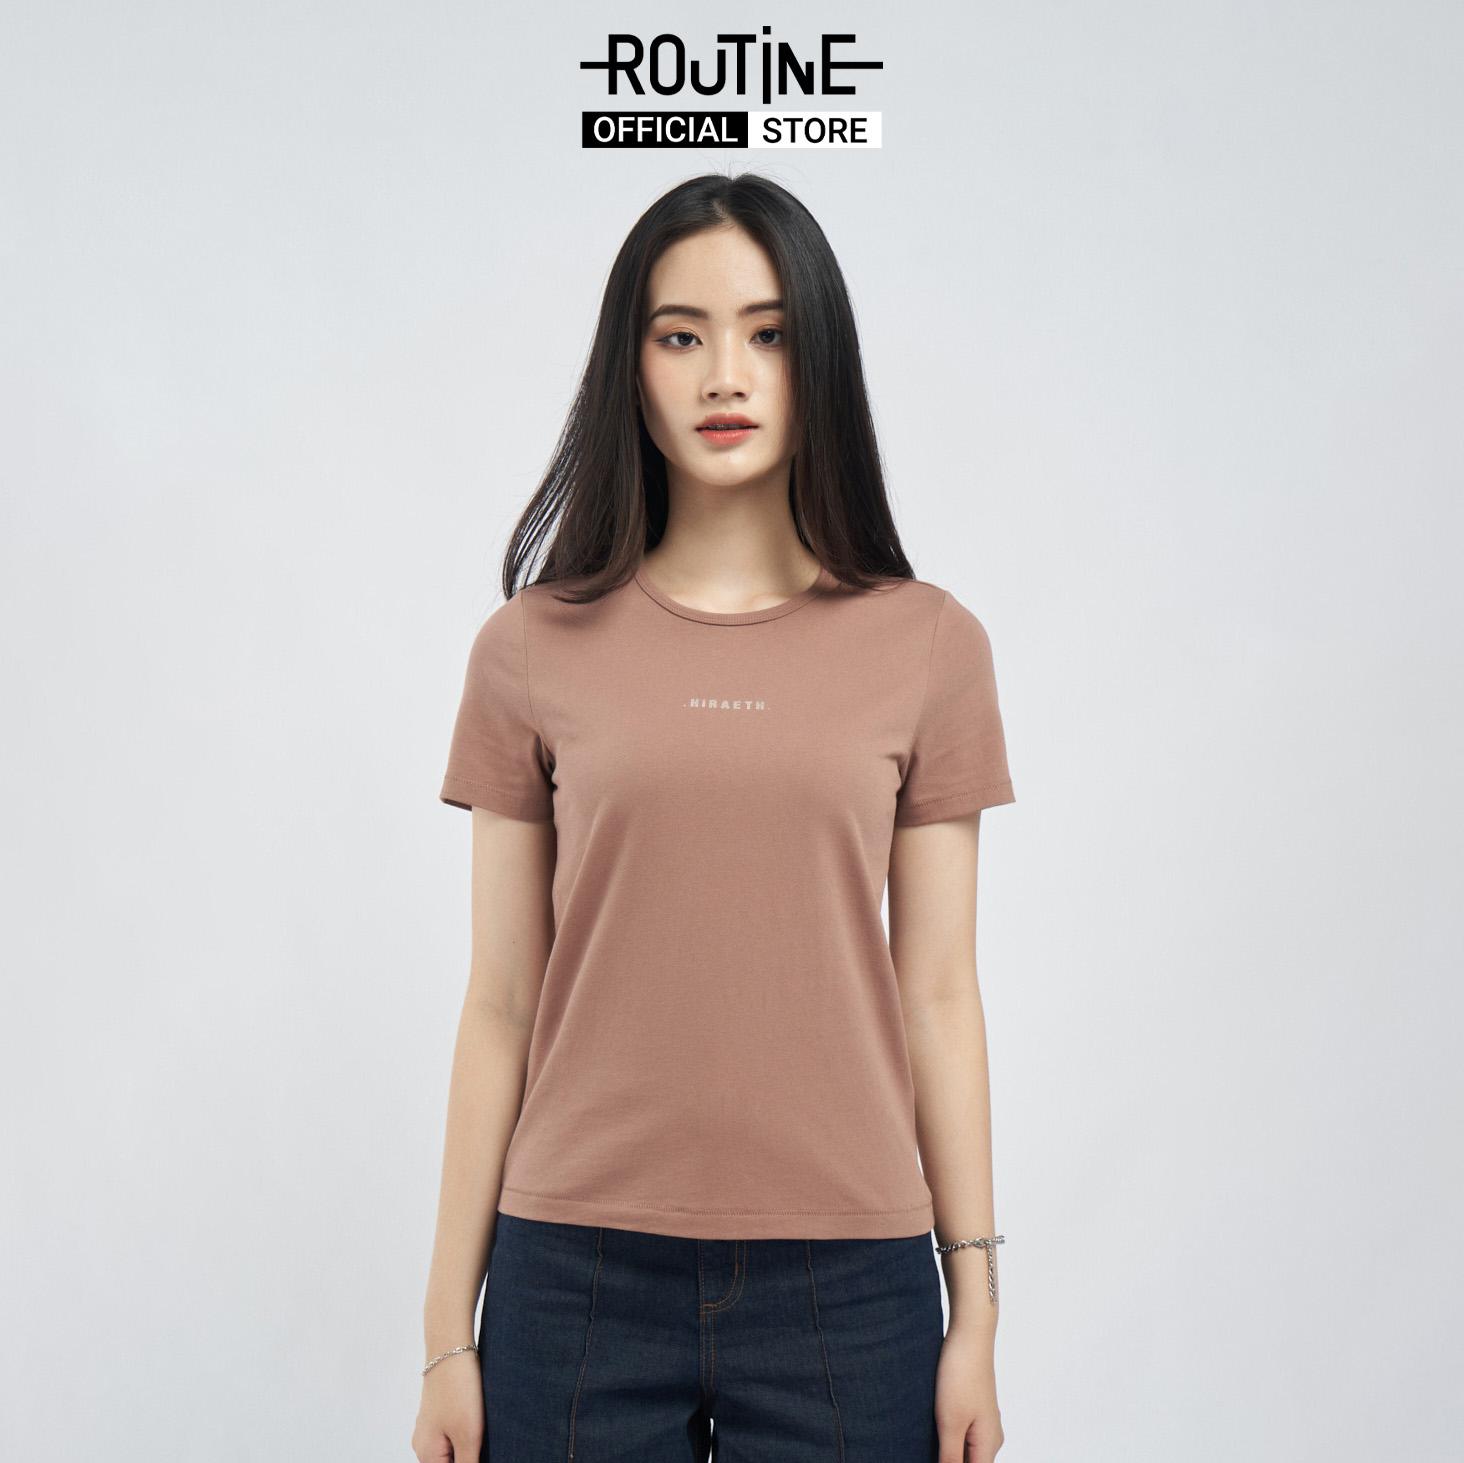 Áo Thun Nữ Tay Ngắn In Họa Tiết Form Fitted - Routine 10F21TSSW013